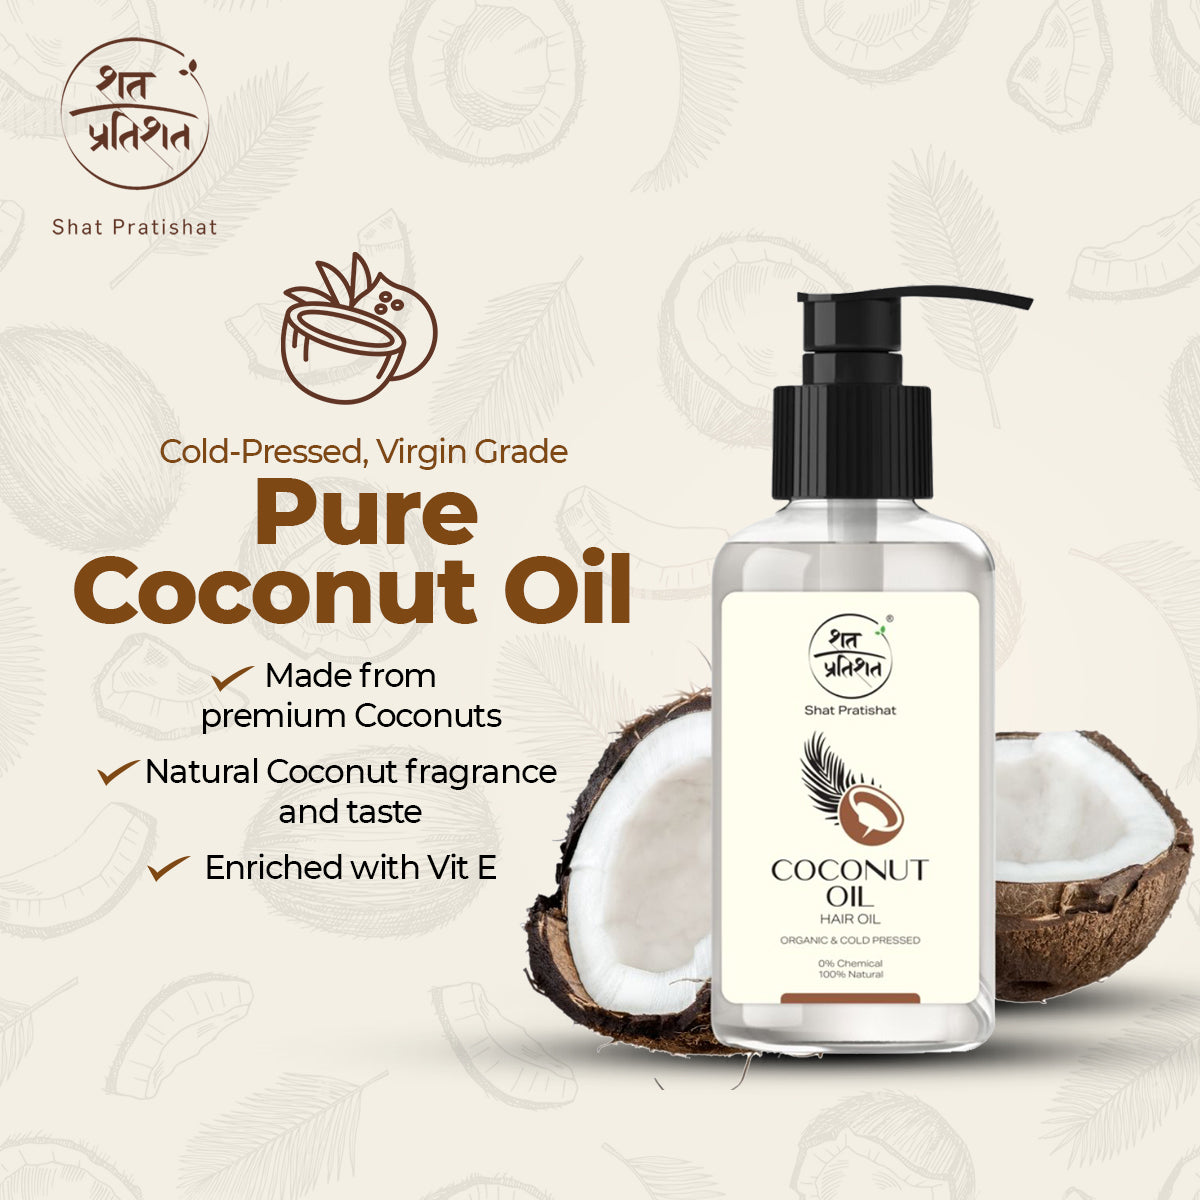 Pure Coconut Oil Organic And Cold Pressed 200ml Shat Pratishat